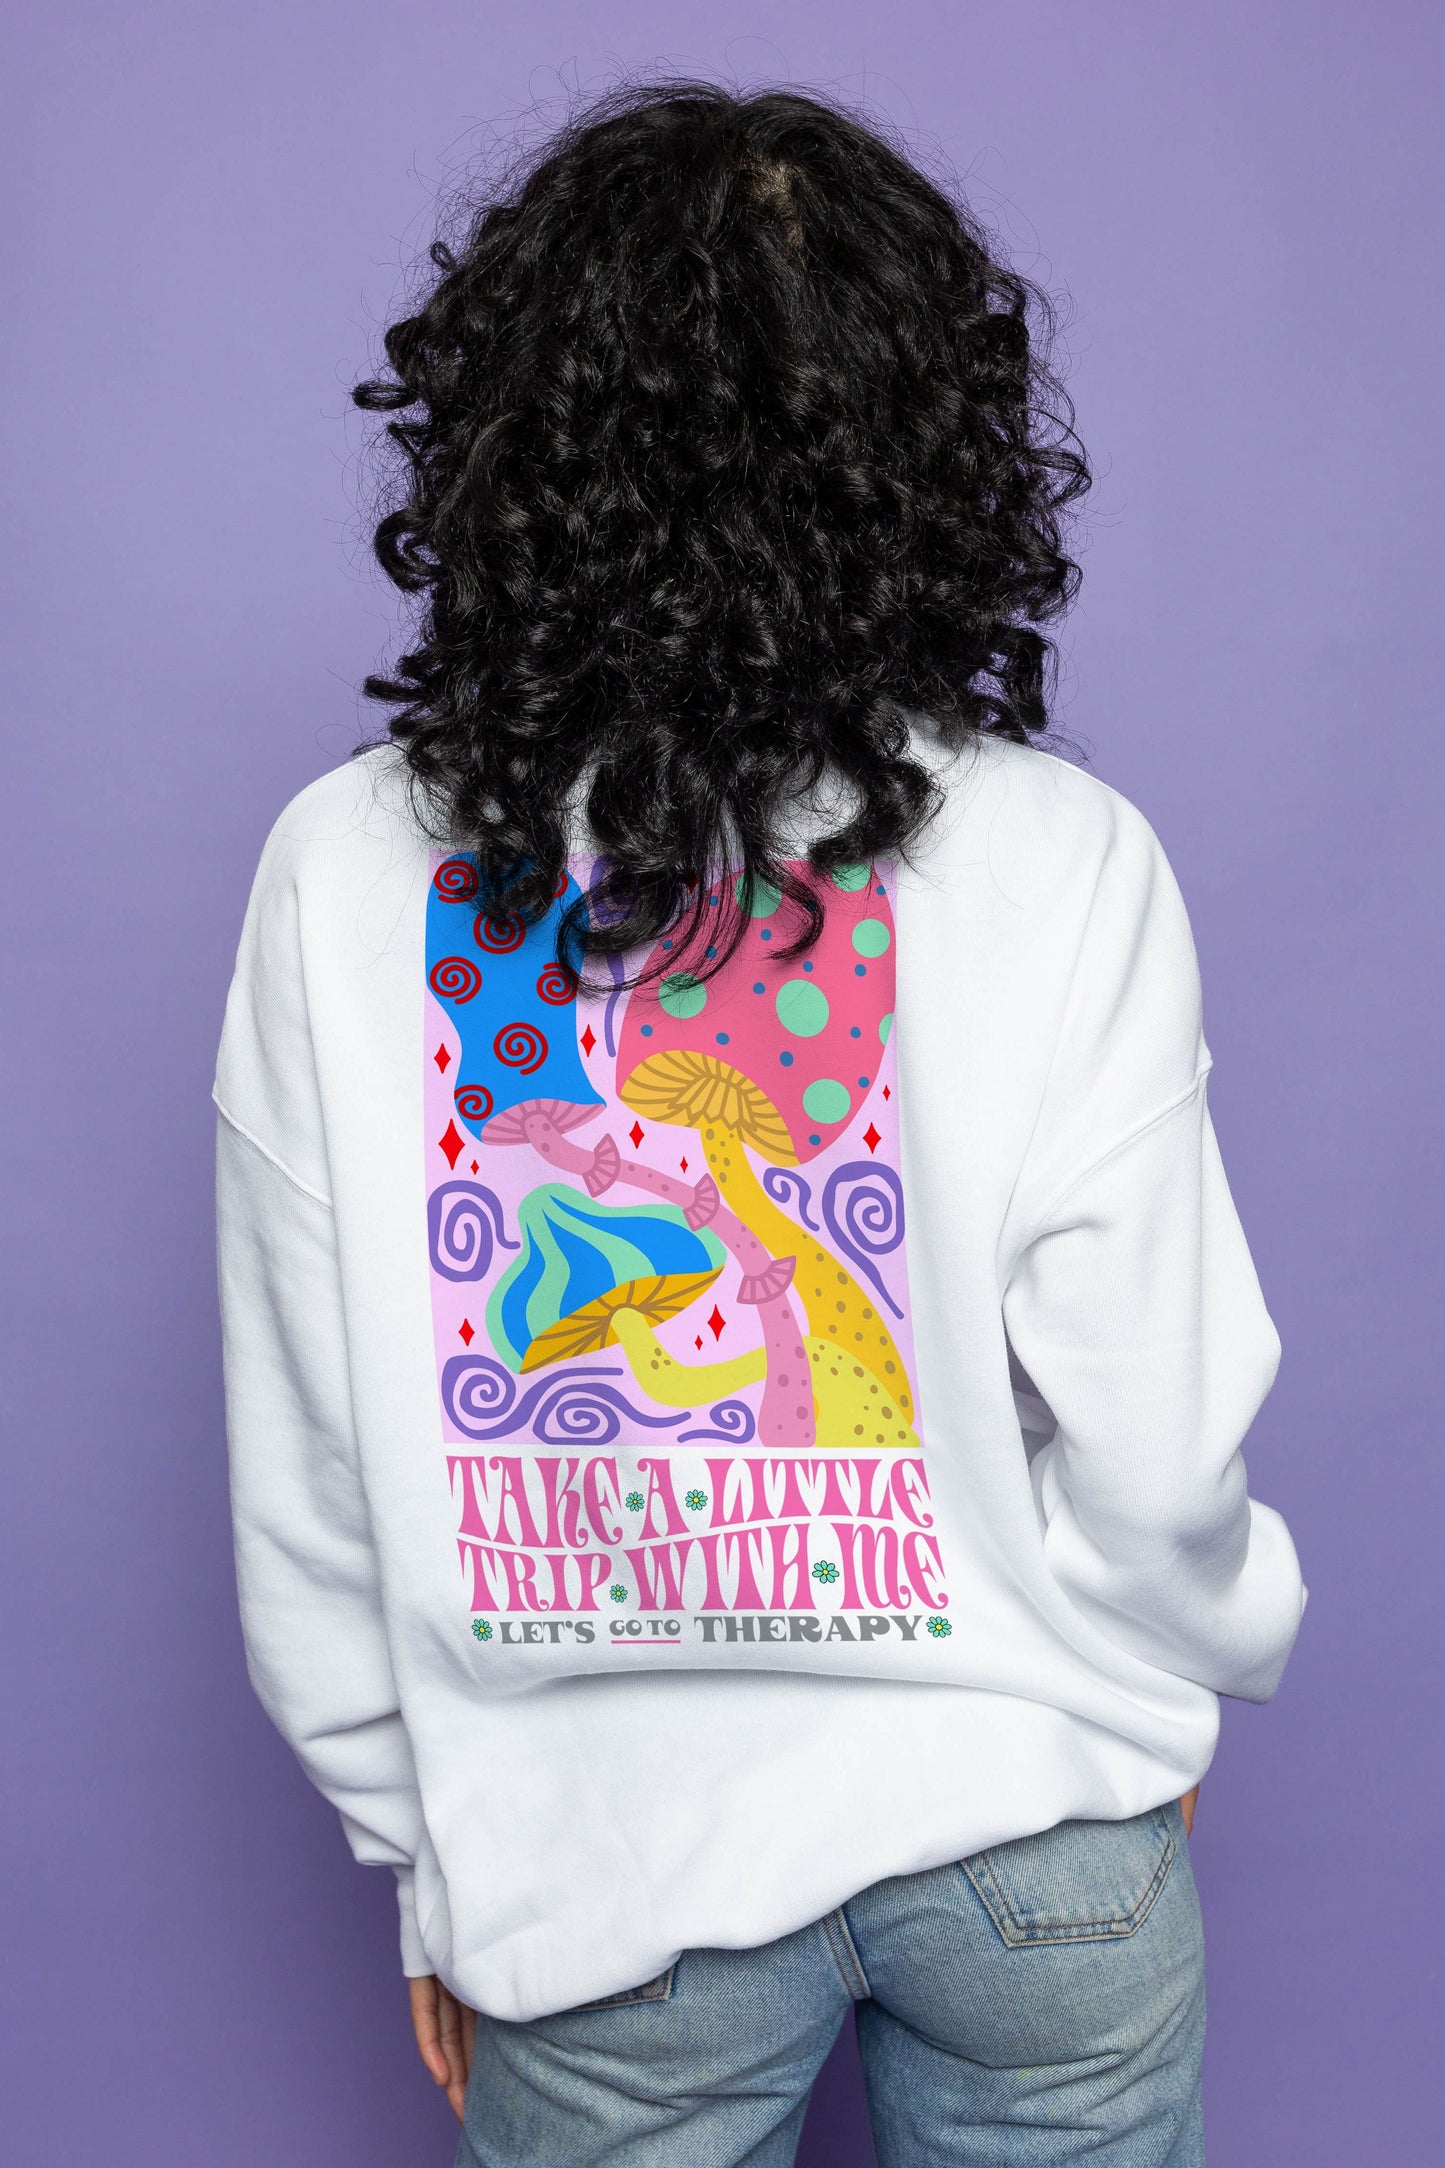 This is The Remix Sweatshirt LET'S GO TO THERAPY - Unisex Sweatshirt white